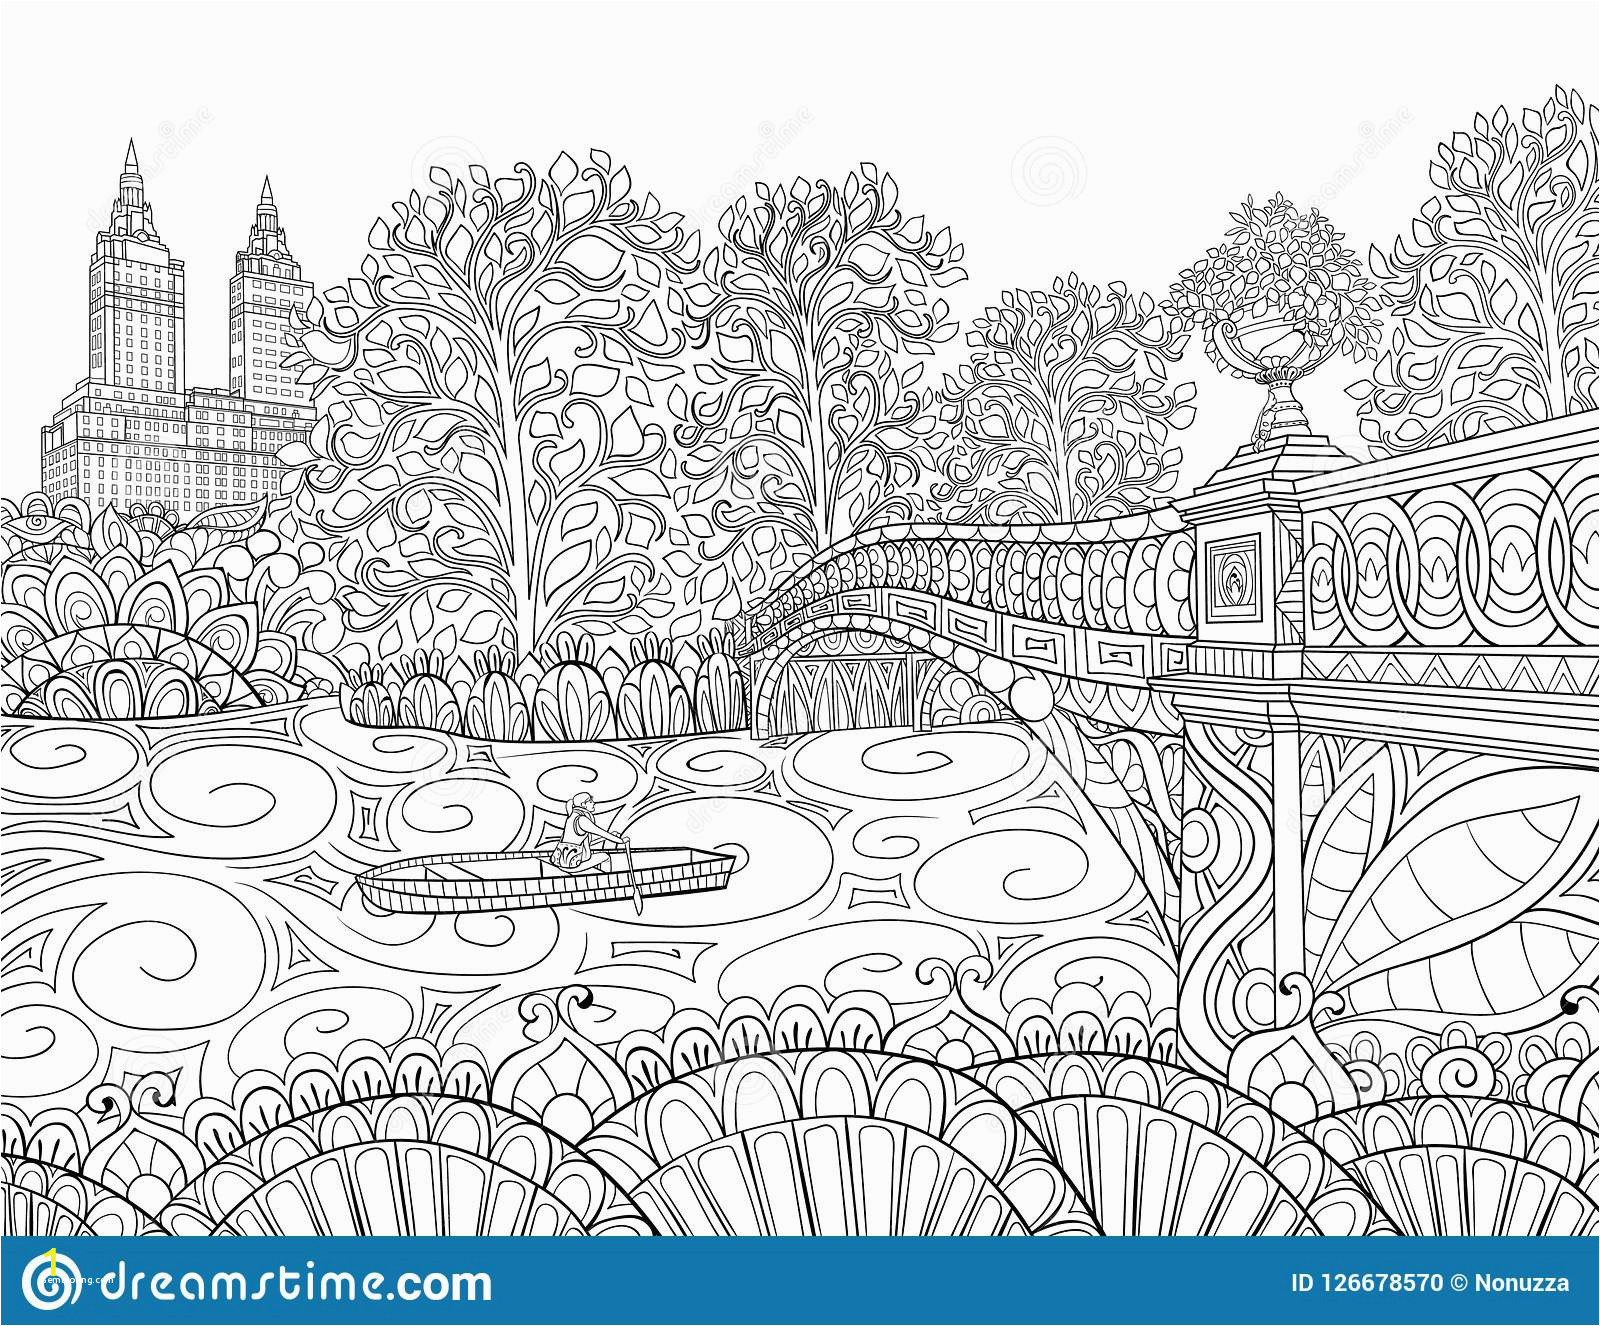 free printable coloring sheets for kids fresh adult coloring book page a landscape image for relaxing of free printable coloring sheets for kids